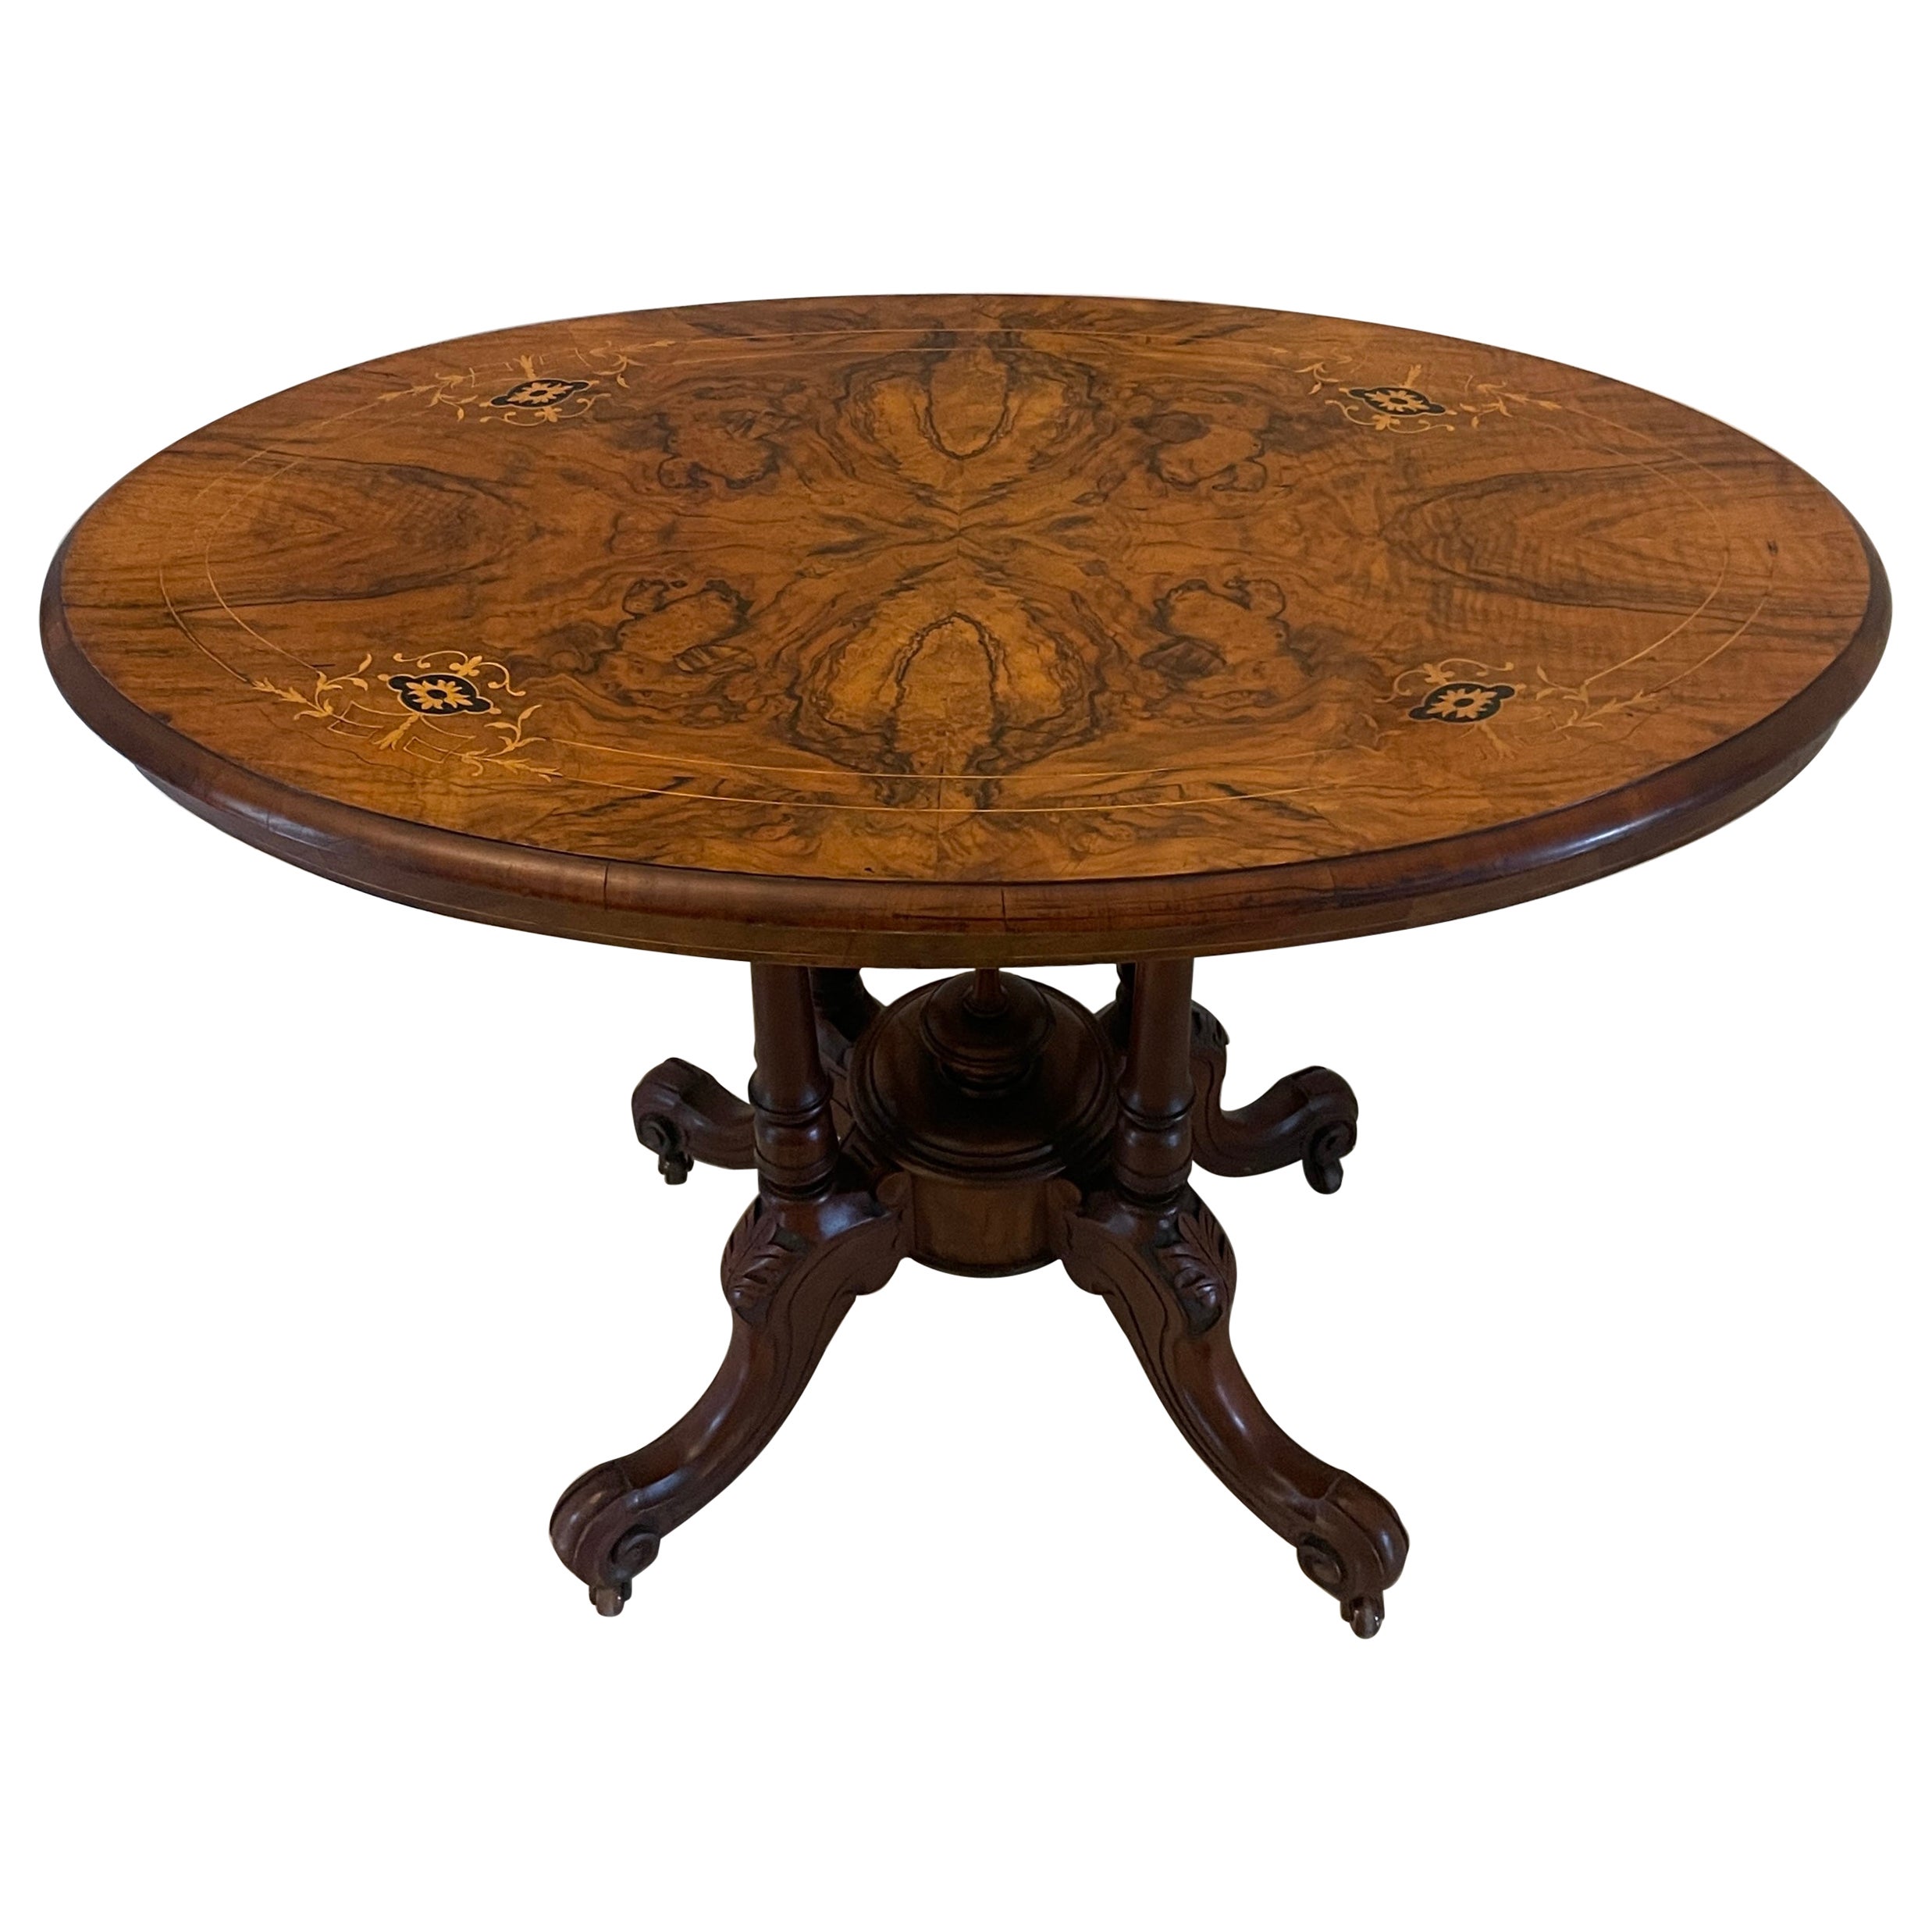 Antique Victorian Quality Inlaid Burr Walnut Oval Centre Table 